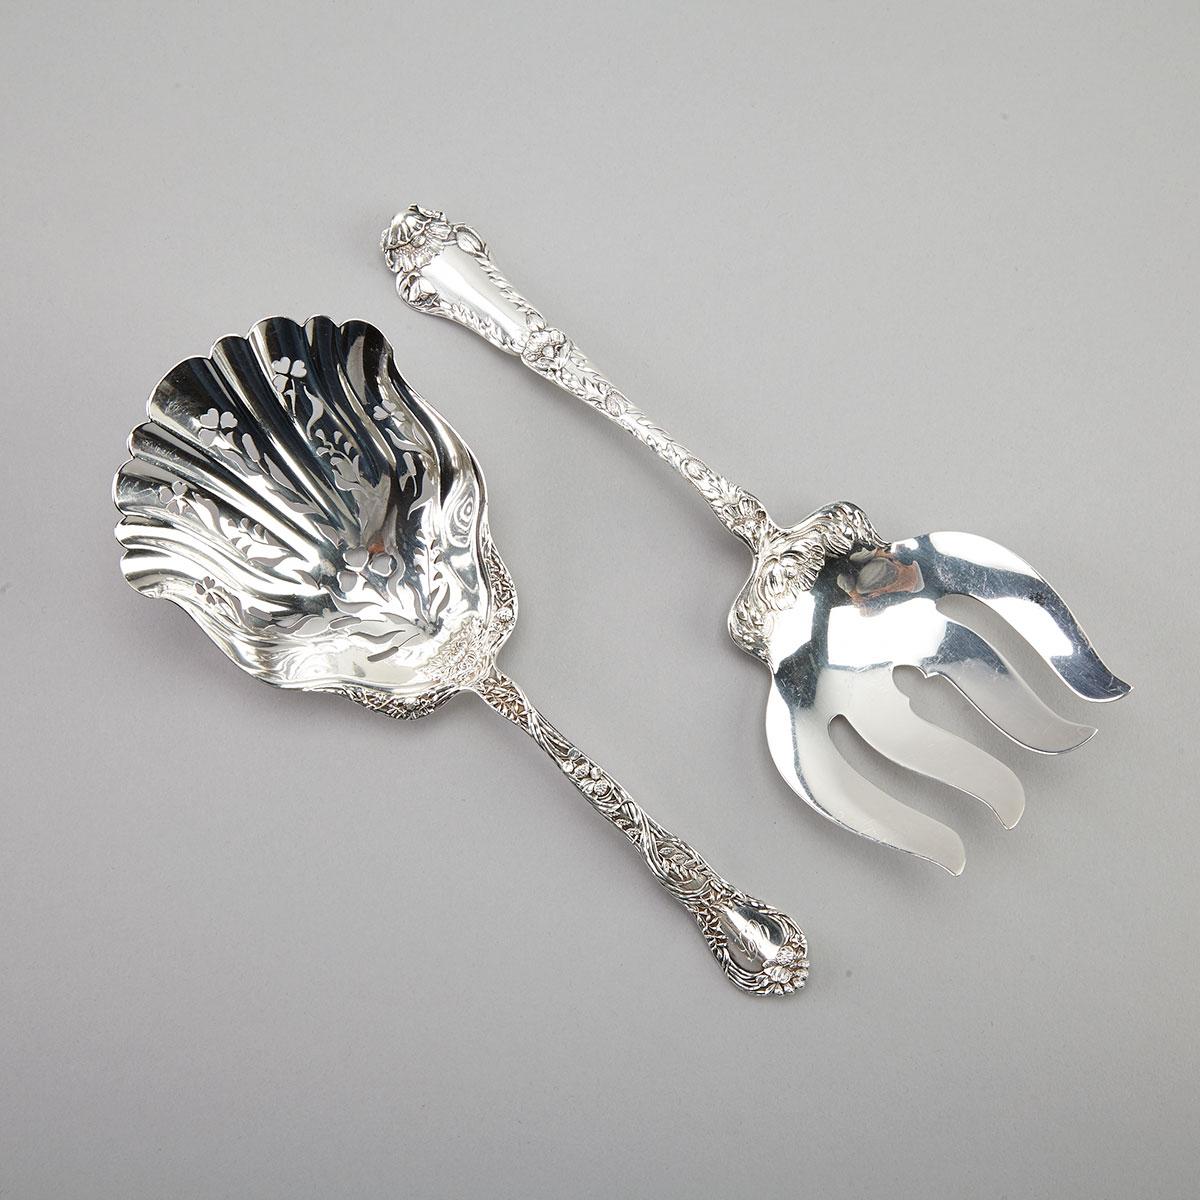 American Silver Pierced Serving Spoon and Fork, Gorham Mfg. Co., Providence, R.I., c.1900